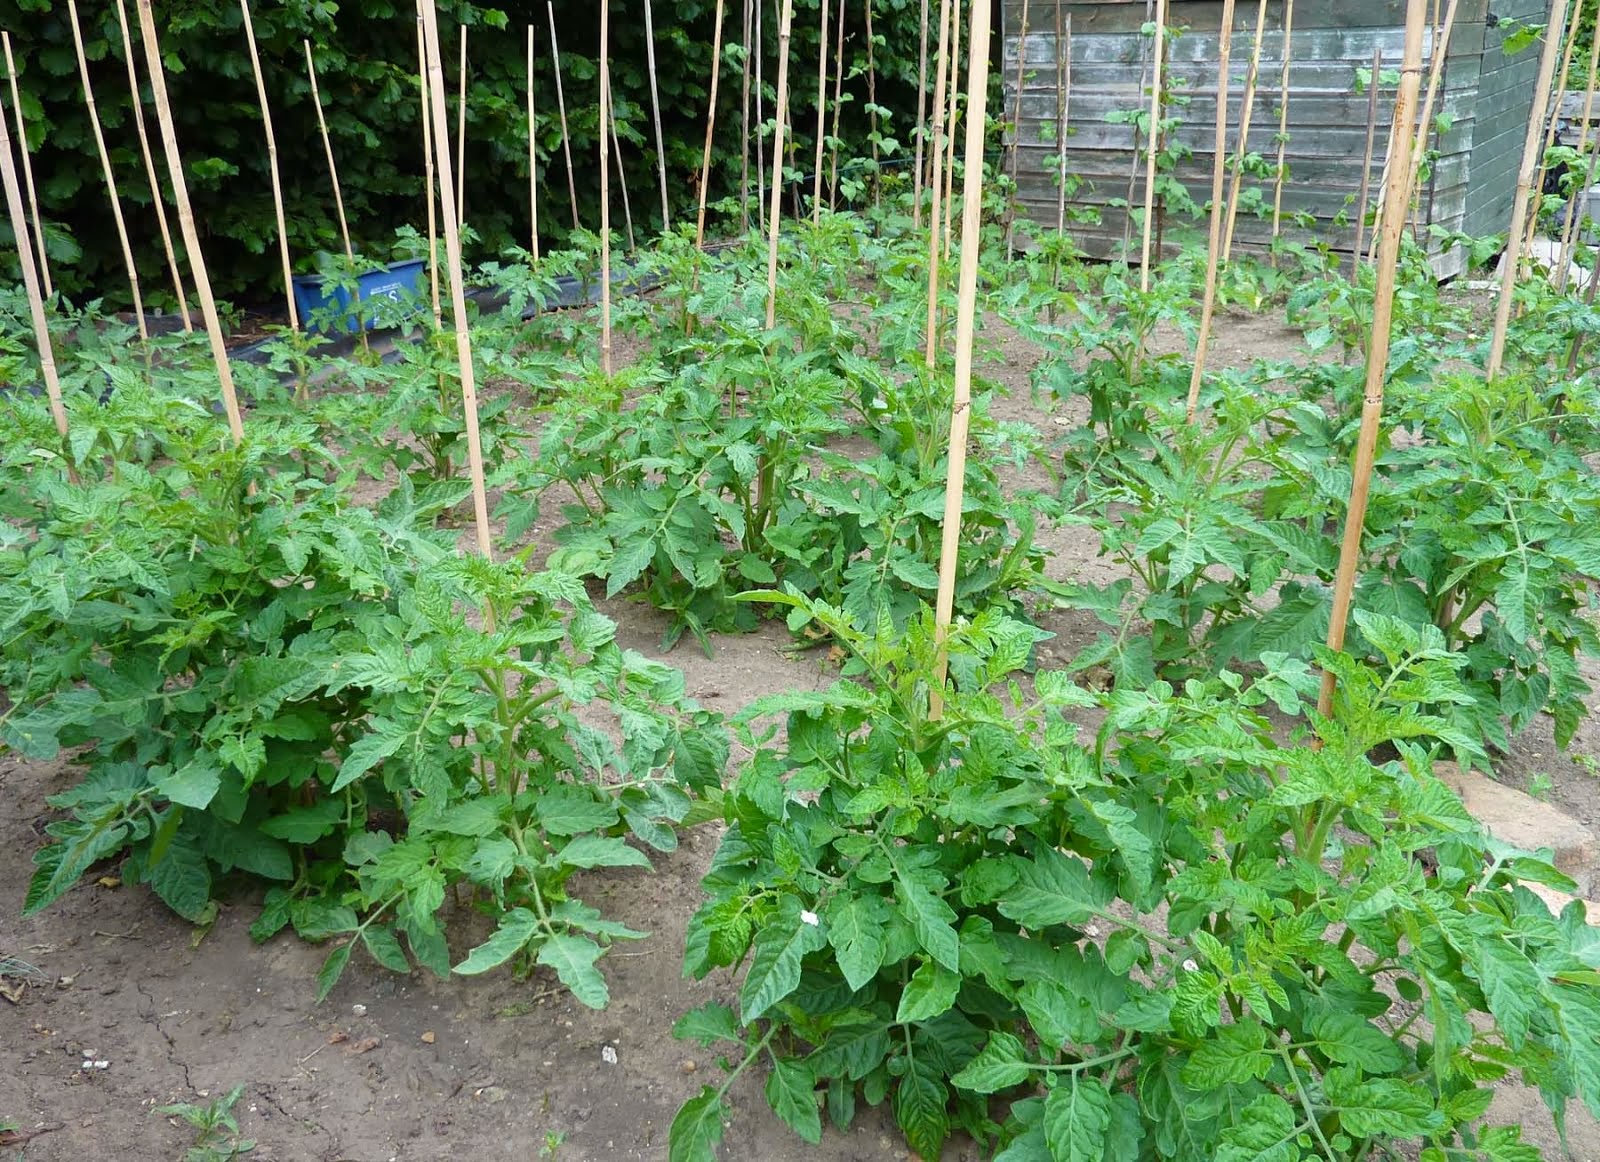 Tomatoes planted in single rows from Tomato Dirt via Morning Ag Clips